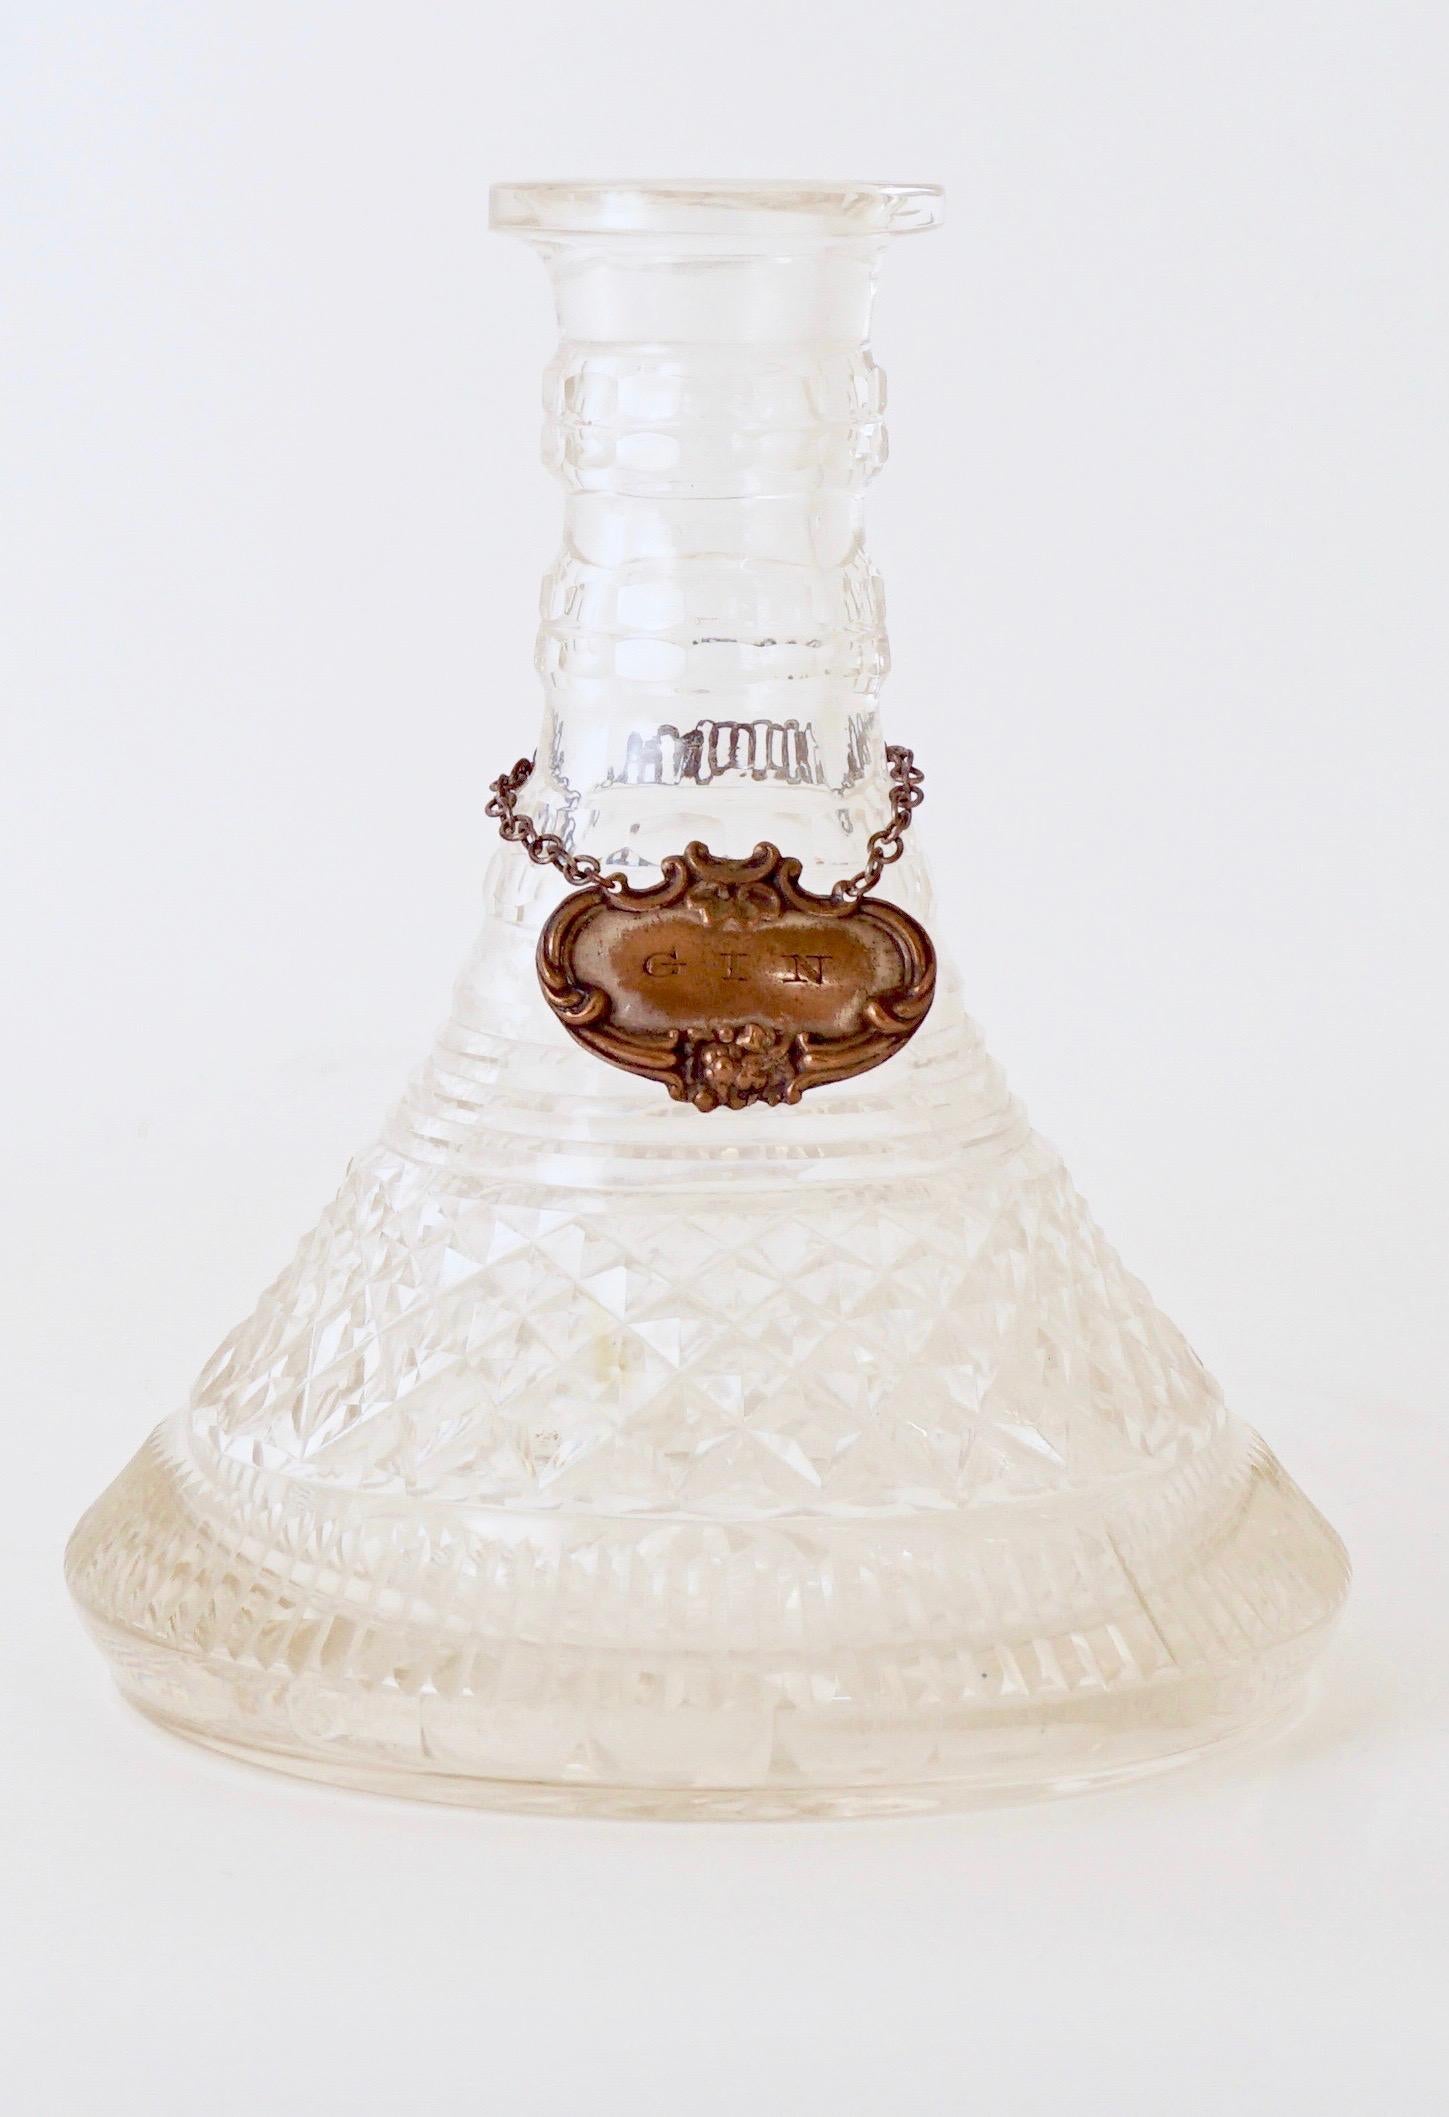 Late Victorian 19th Century Crystal Glass Ships Decanters, Pair for Whiskey and Gin For Sale